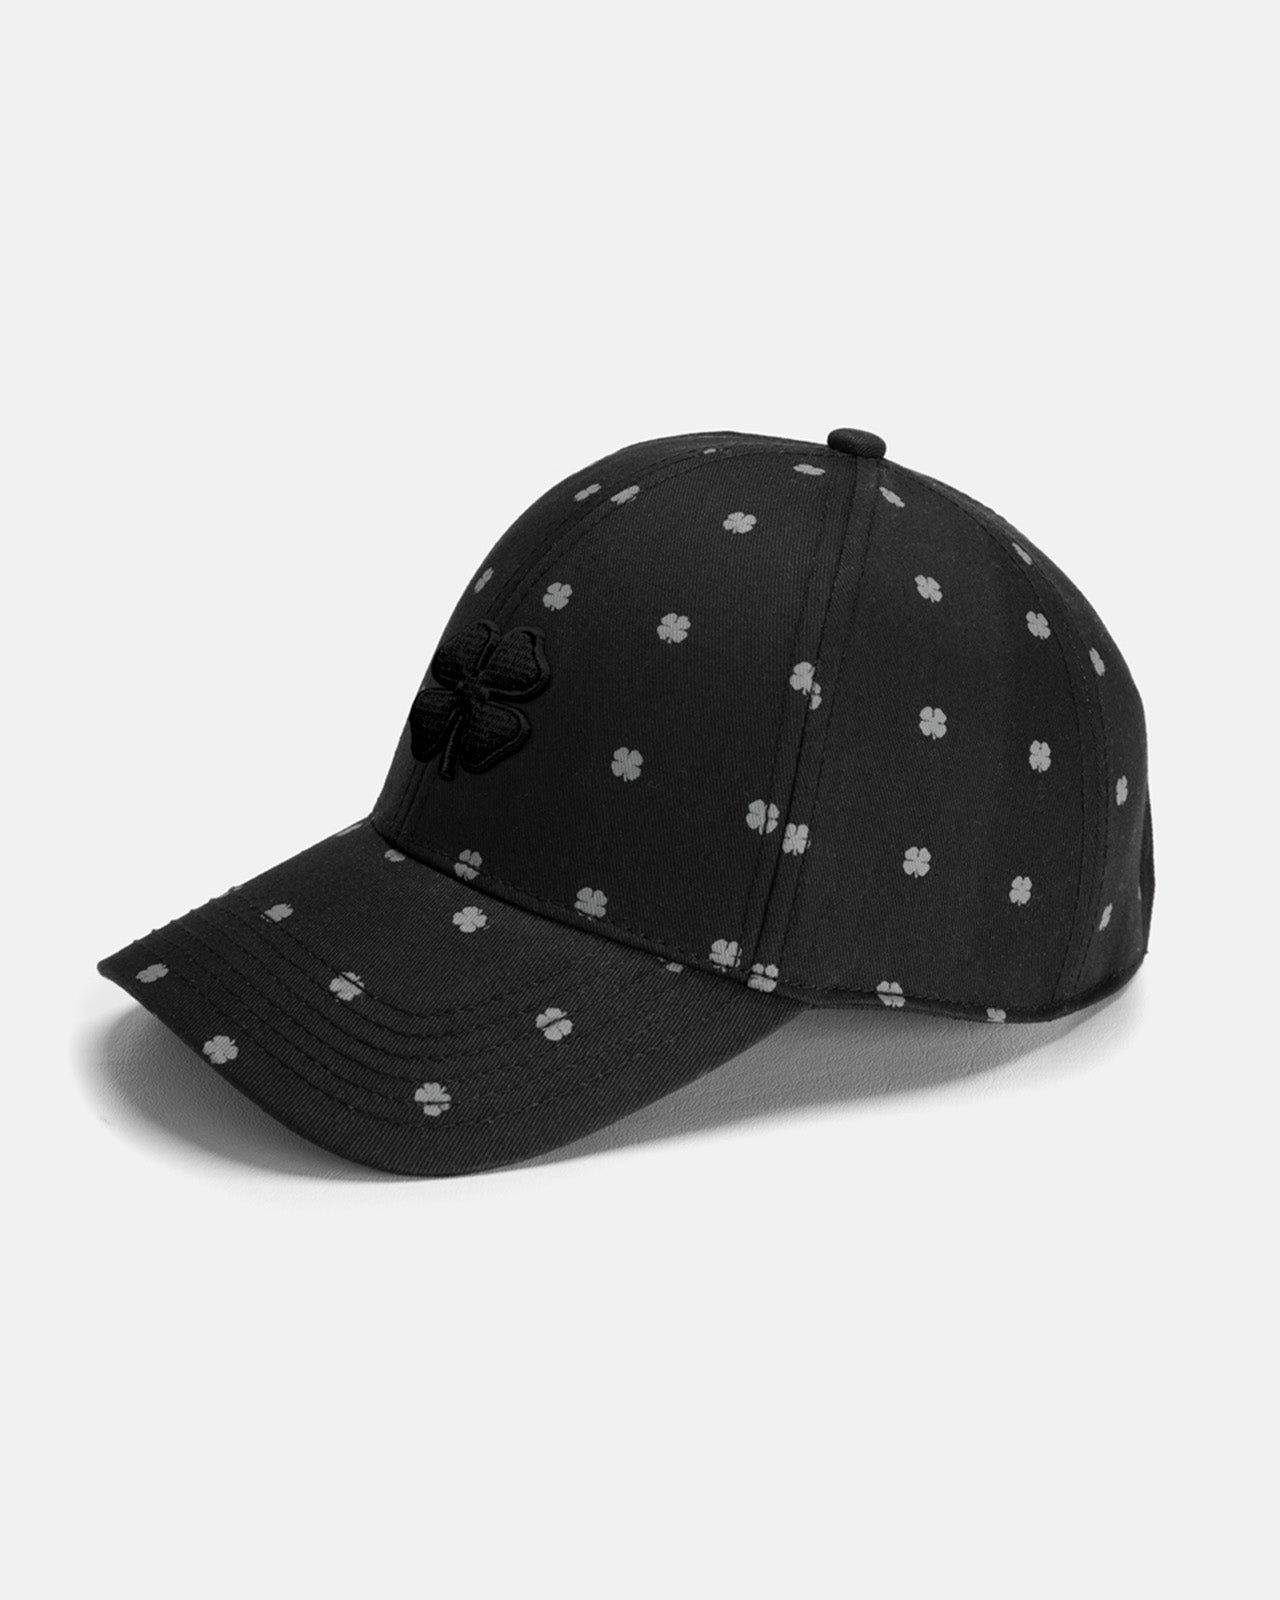 Lots of Luck 2 | Women's Hat | Black Clover | Live Lucky Hats